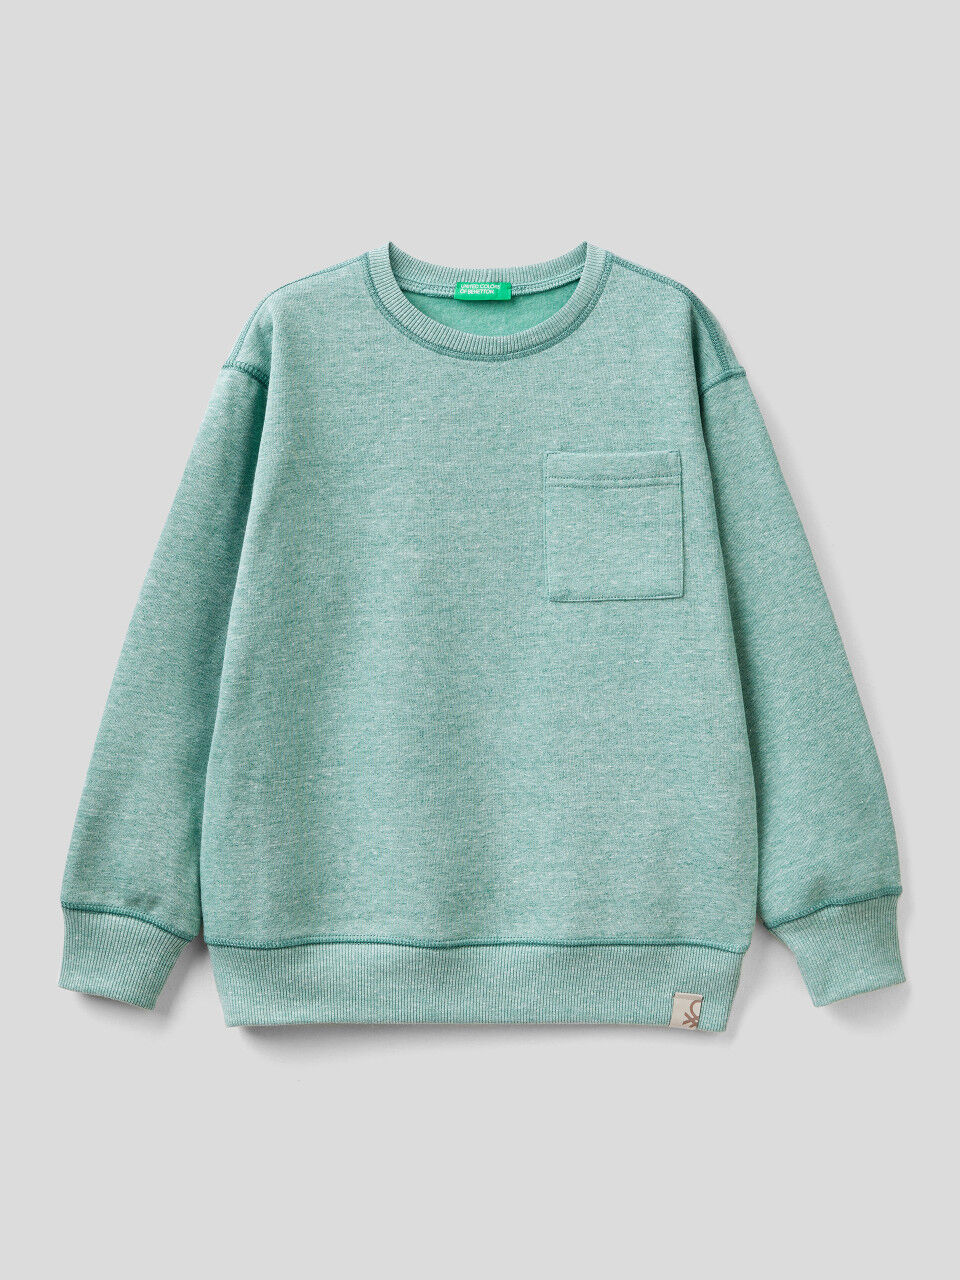 Pullover sweatshirt in recycled fabric